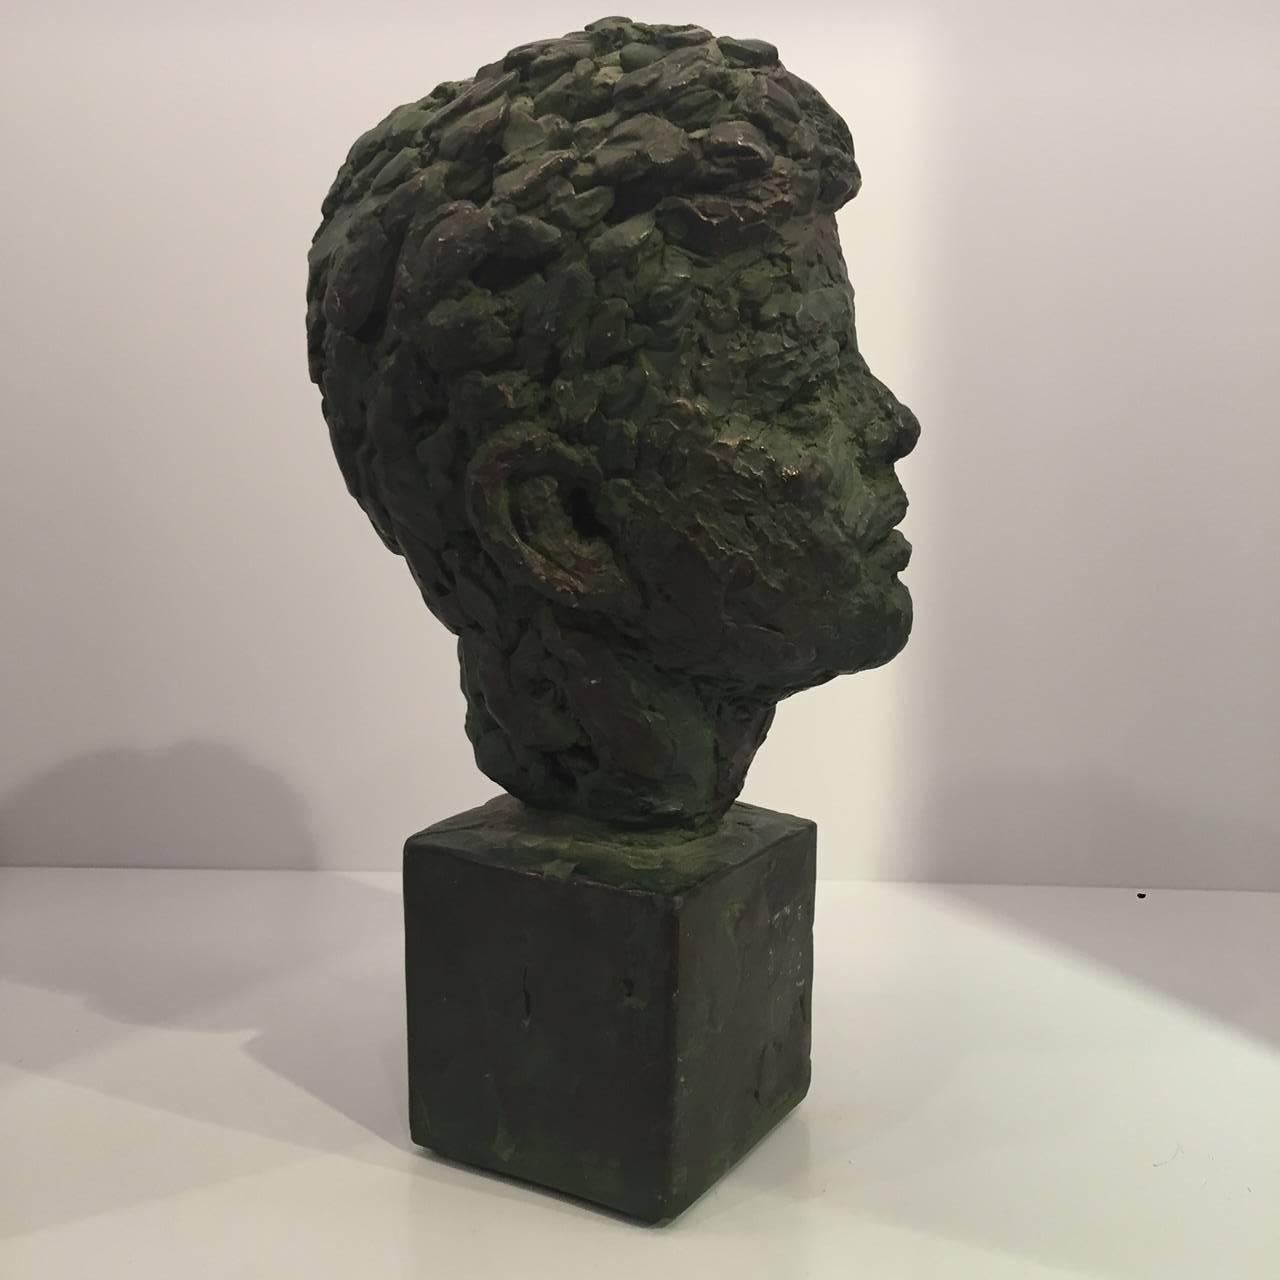 Bust of former President John Fitzgerald Kennedy made of bronze-patinated plaster by Robert Berks, American sculptor (1922-2011).
It bears the artist's signature 